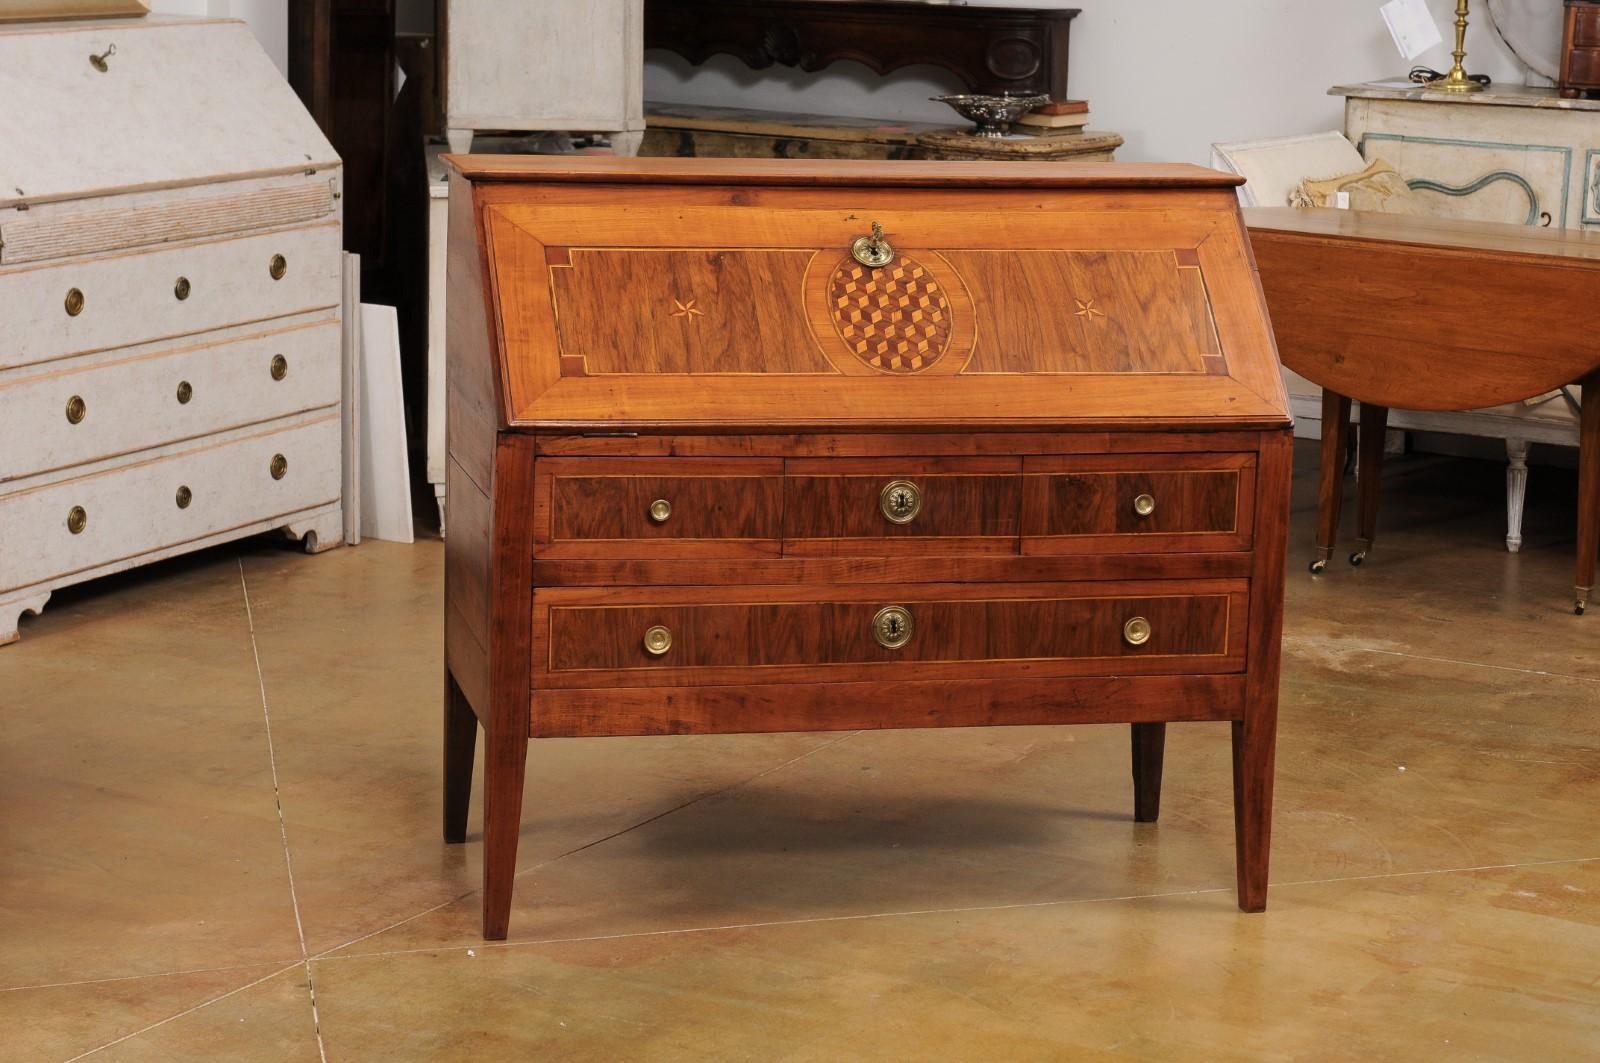 Louis XVI French 1790s Walnut and Cherry Slant Front Desk with Marquetry Geometric Decor